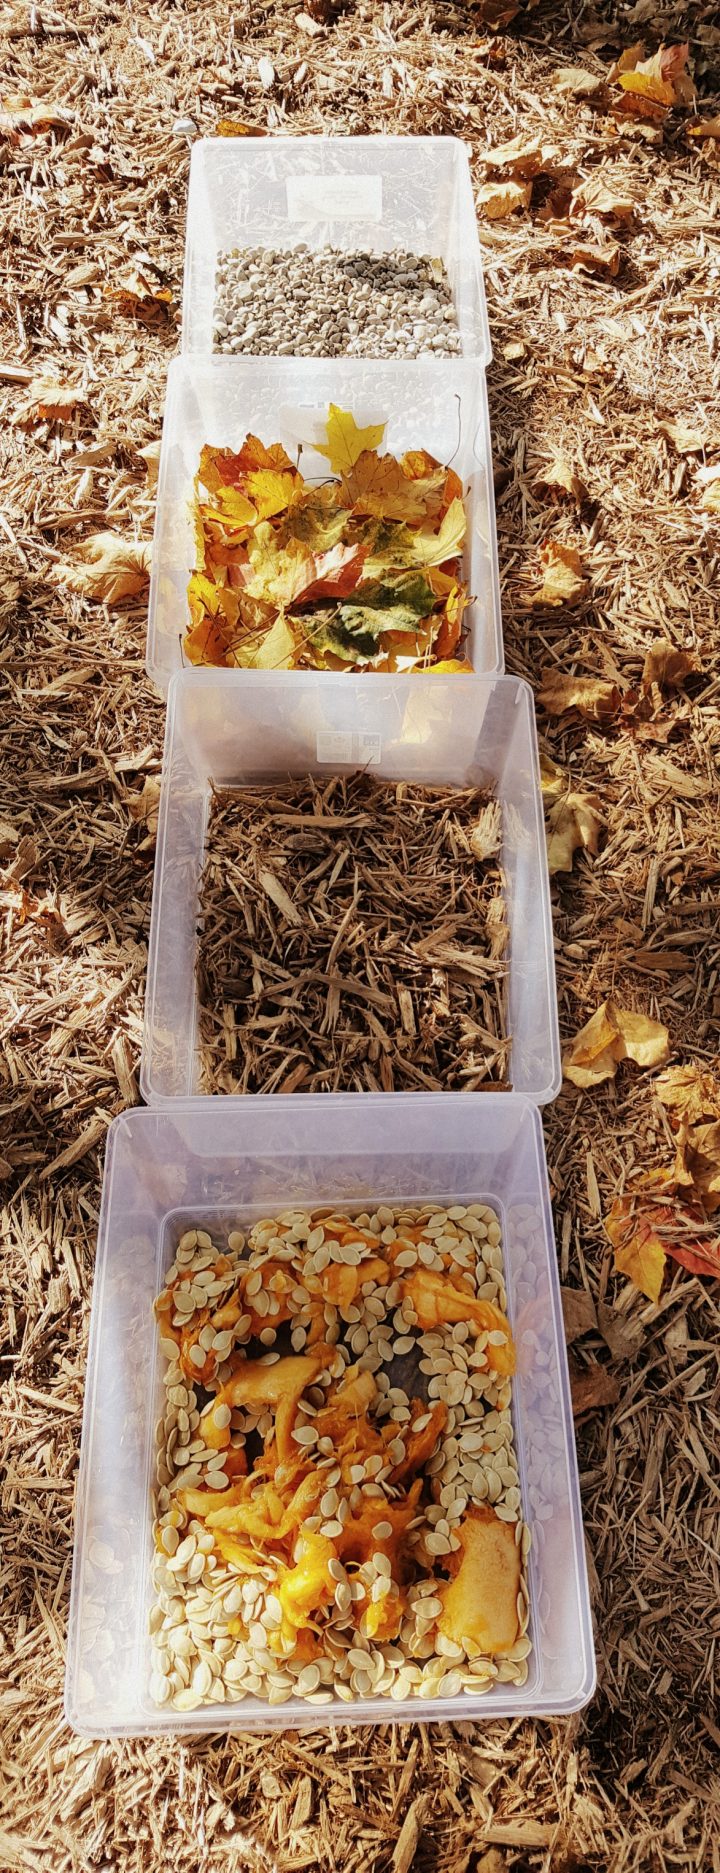 fall sensory walk shows a row of bins with stones, leaves, twigs and pumpkin guts.